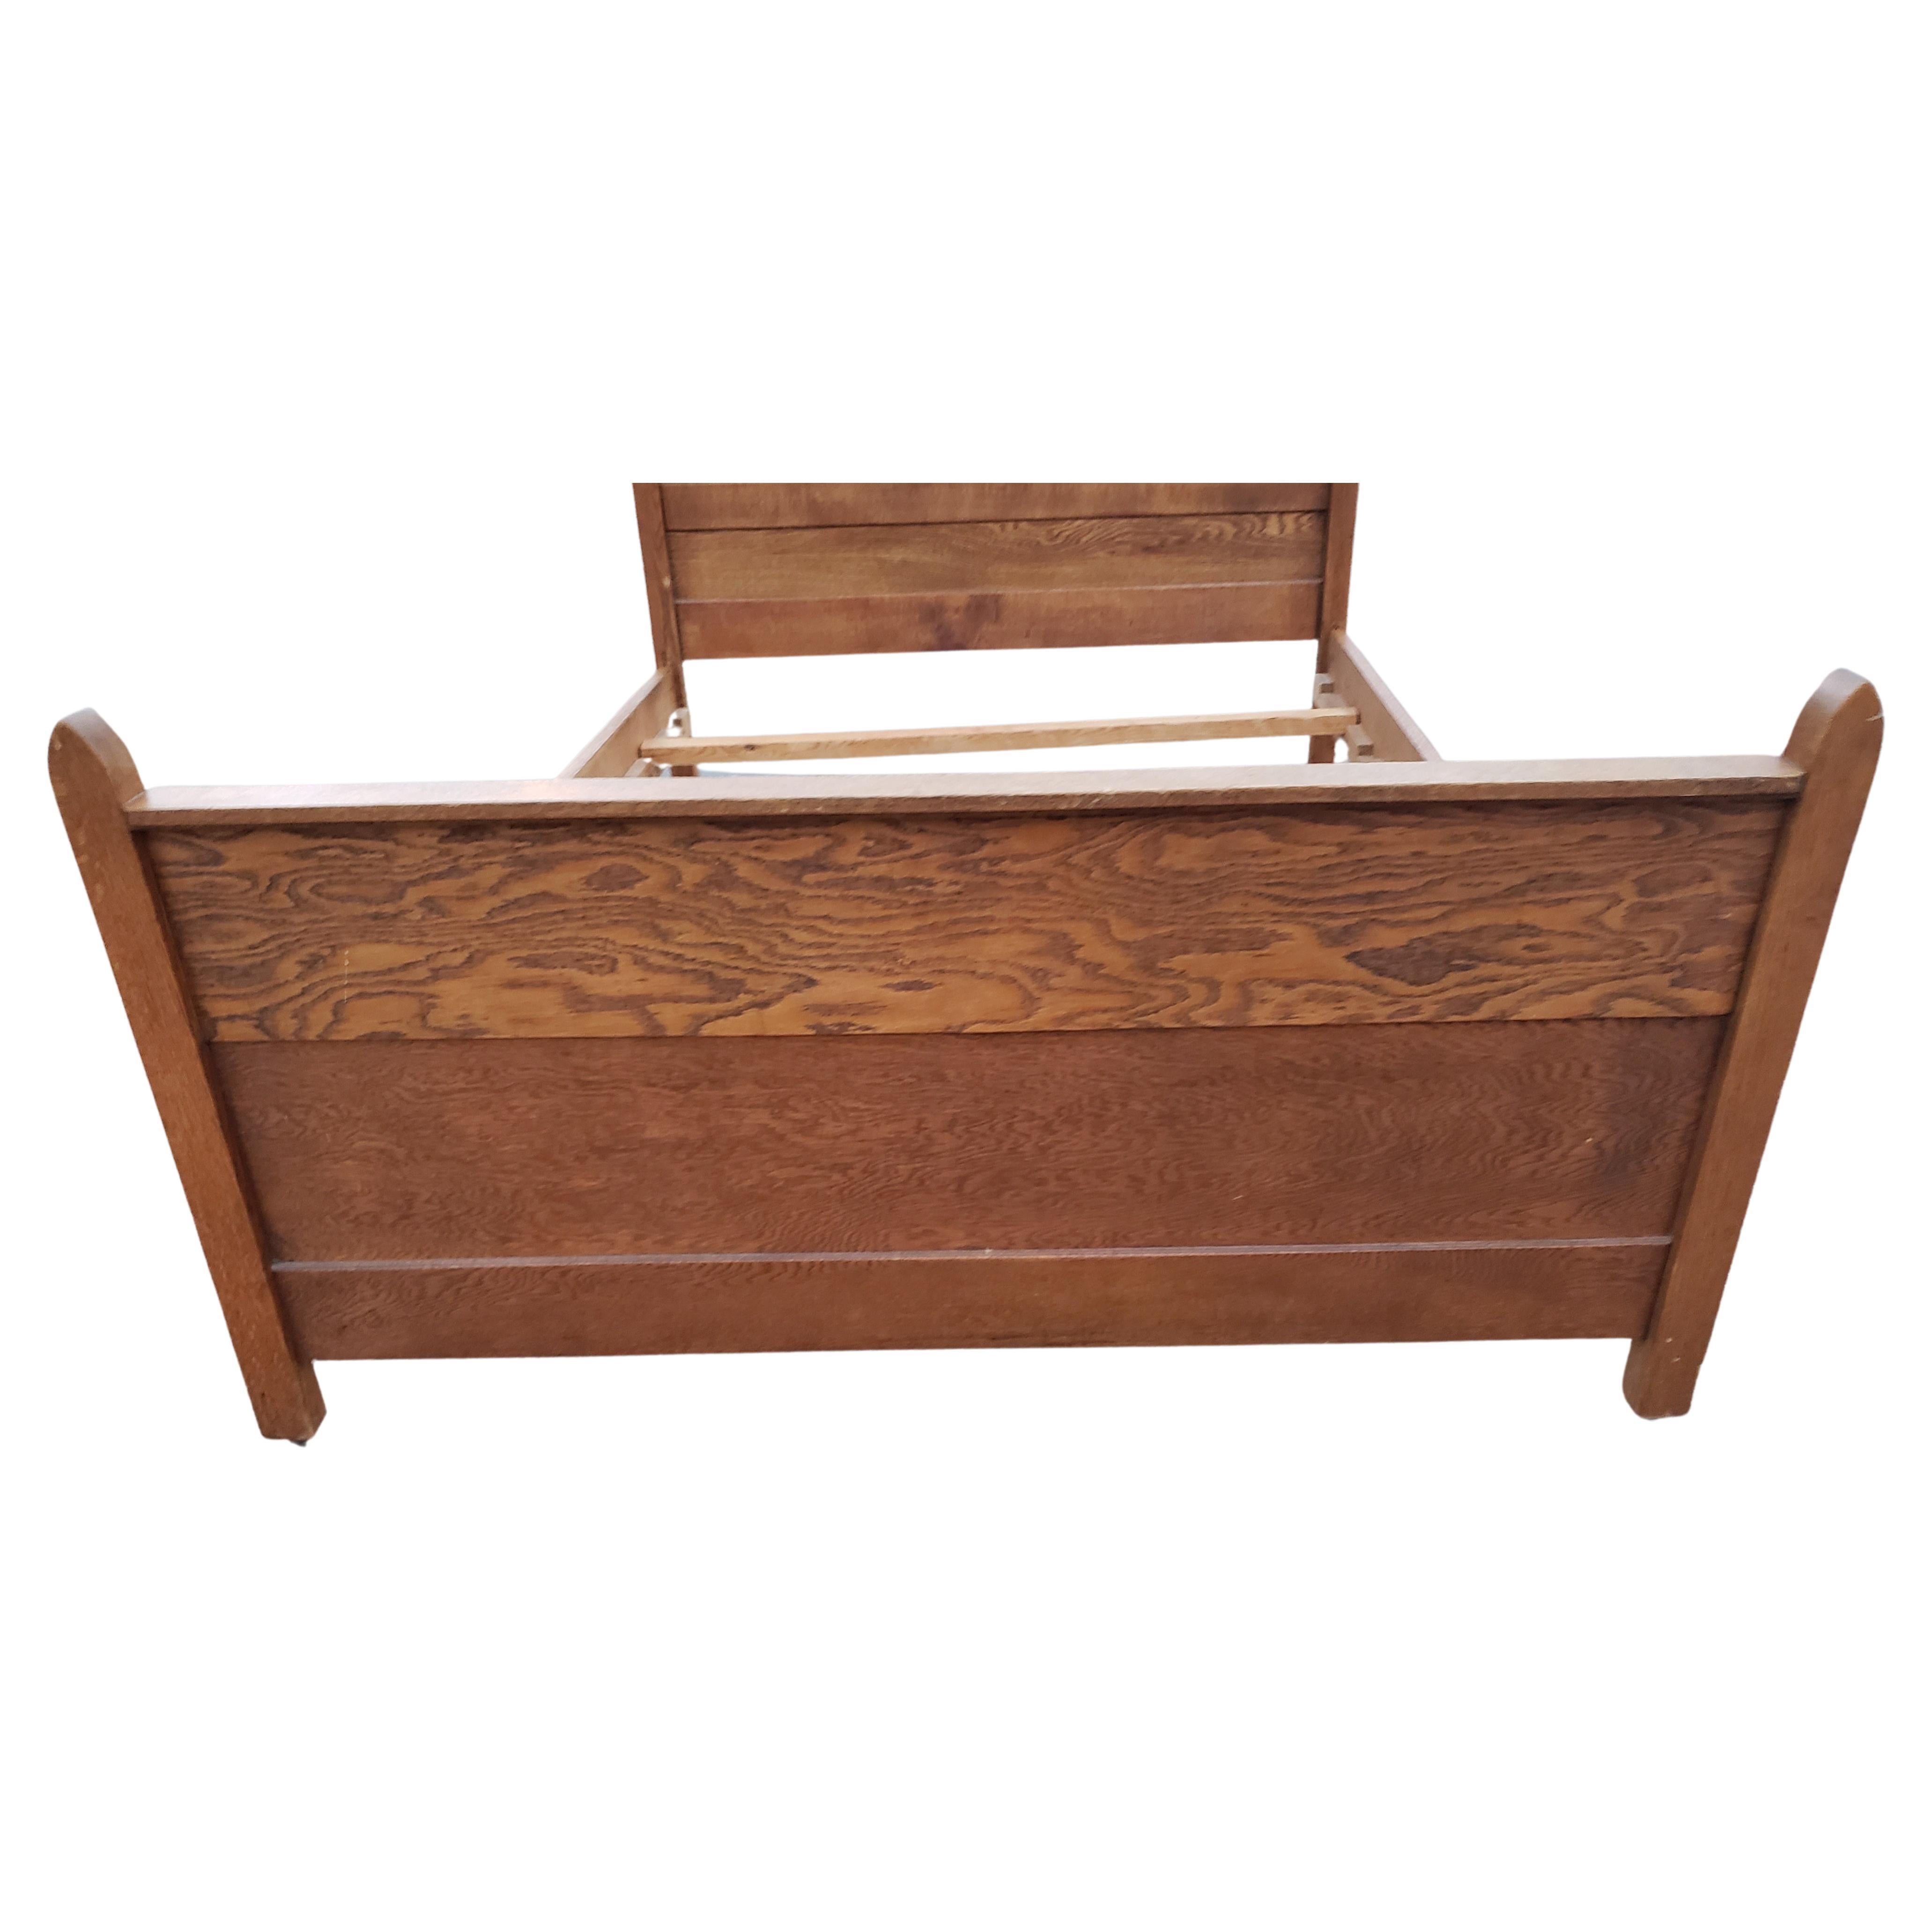 Hand-Crafted Edwardian Tiger Oak Full Size Bed on Wheels, circa 1920s